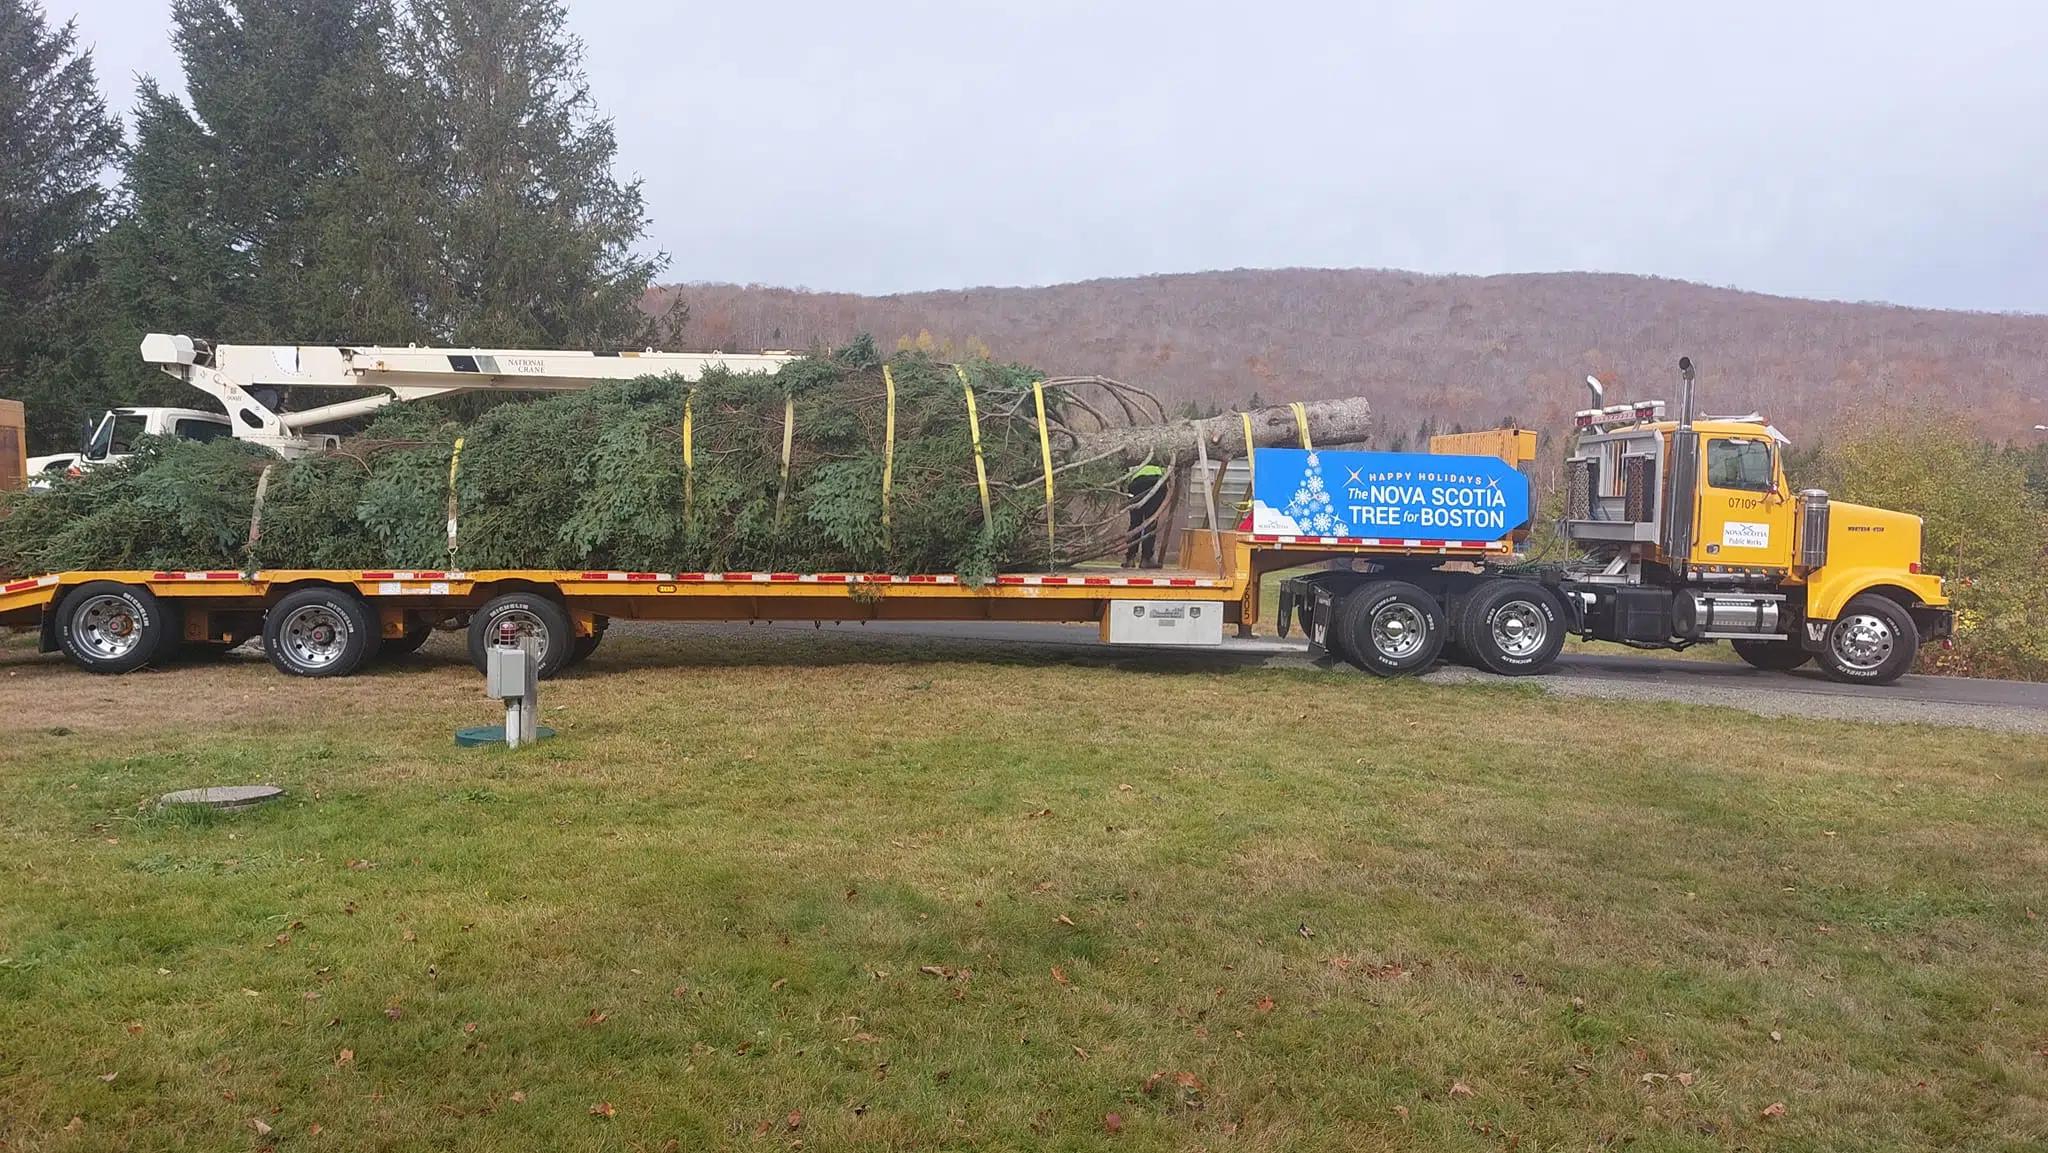 Tree for Boston on its way!